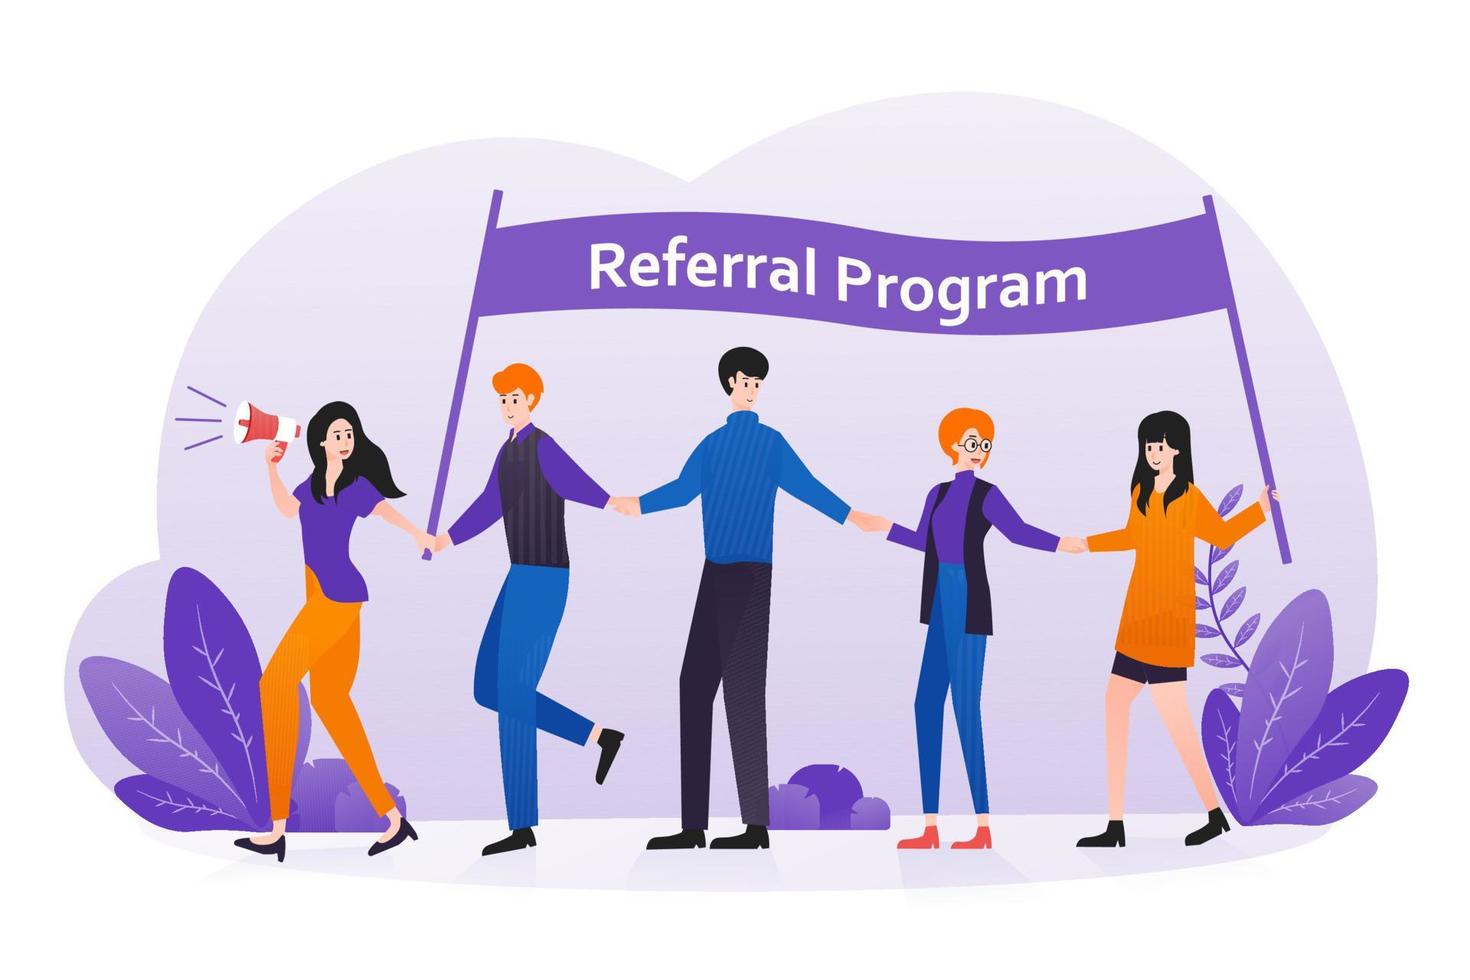 Referral program strategy with people holding hands. Referral marketing, affiliate marketing, network marketing, business partnership concept vector